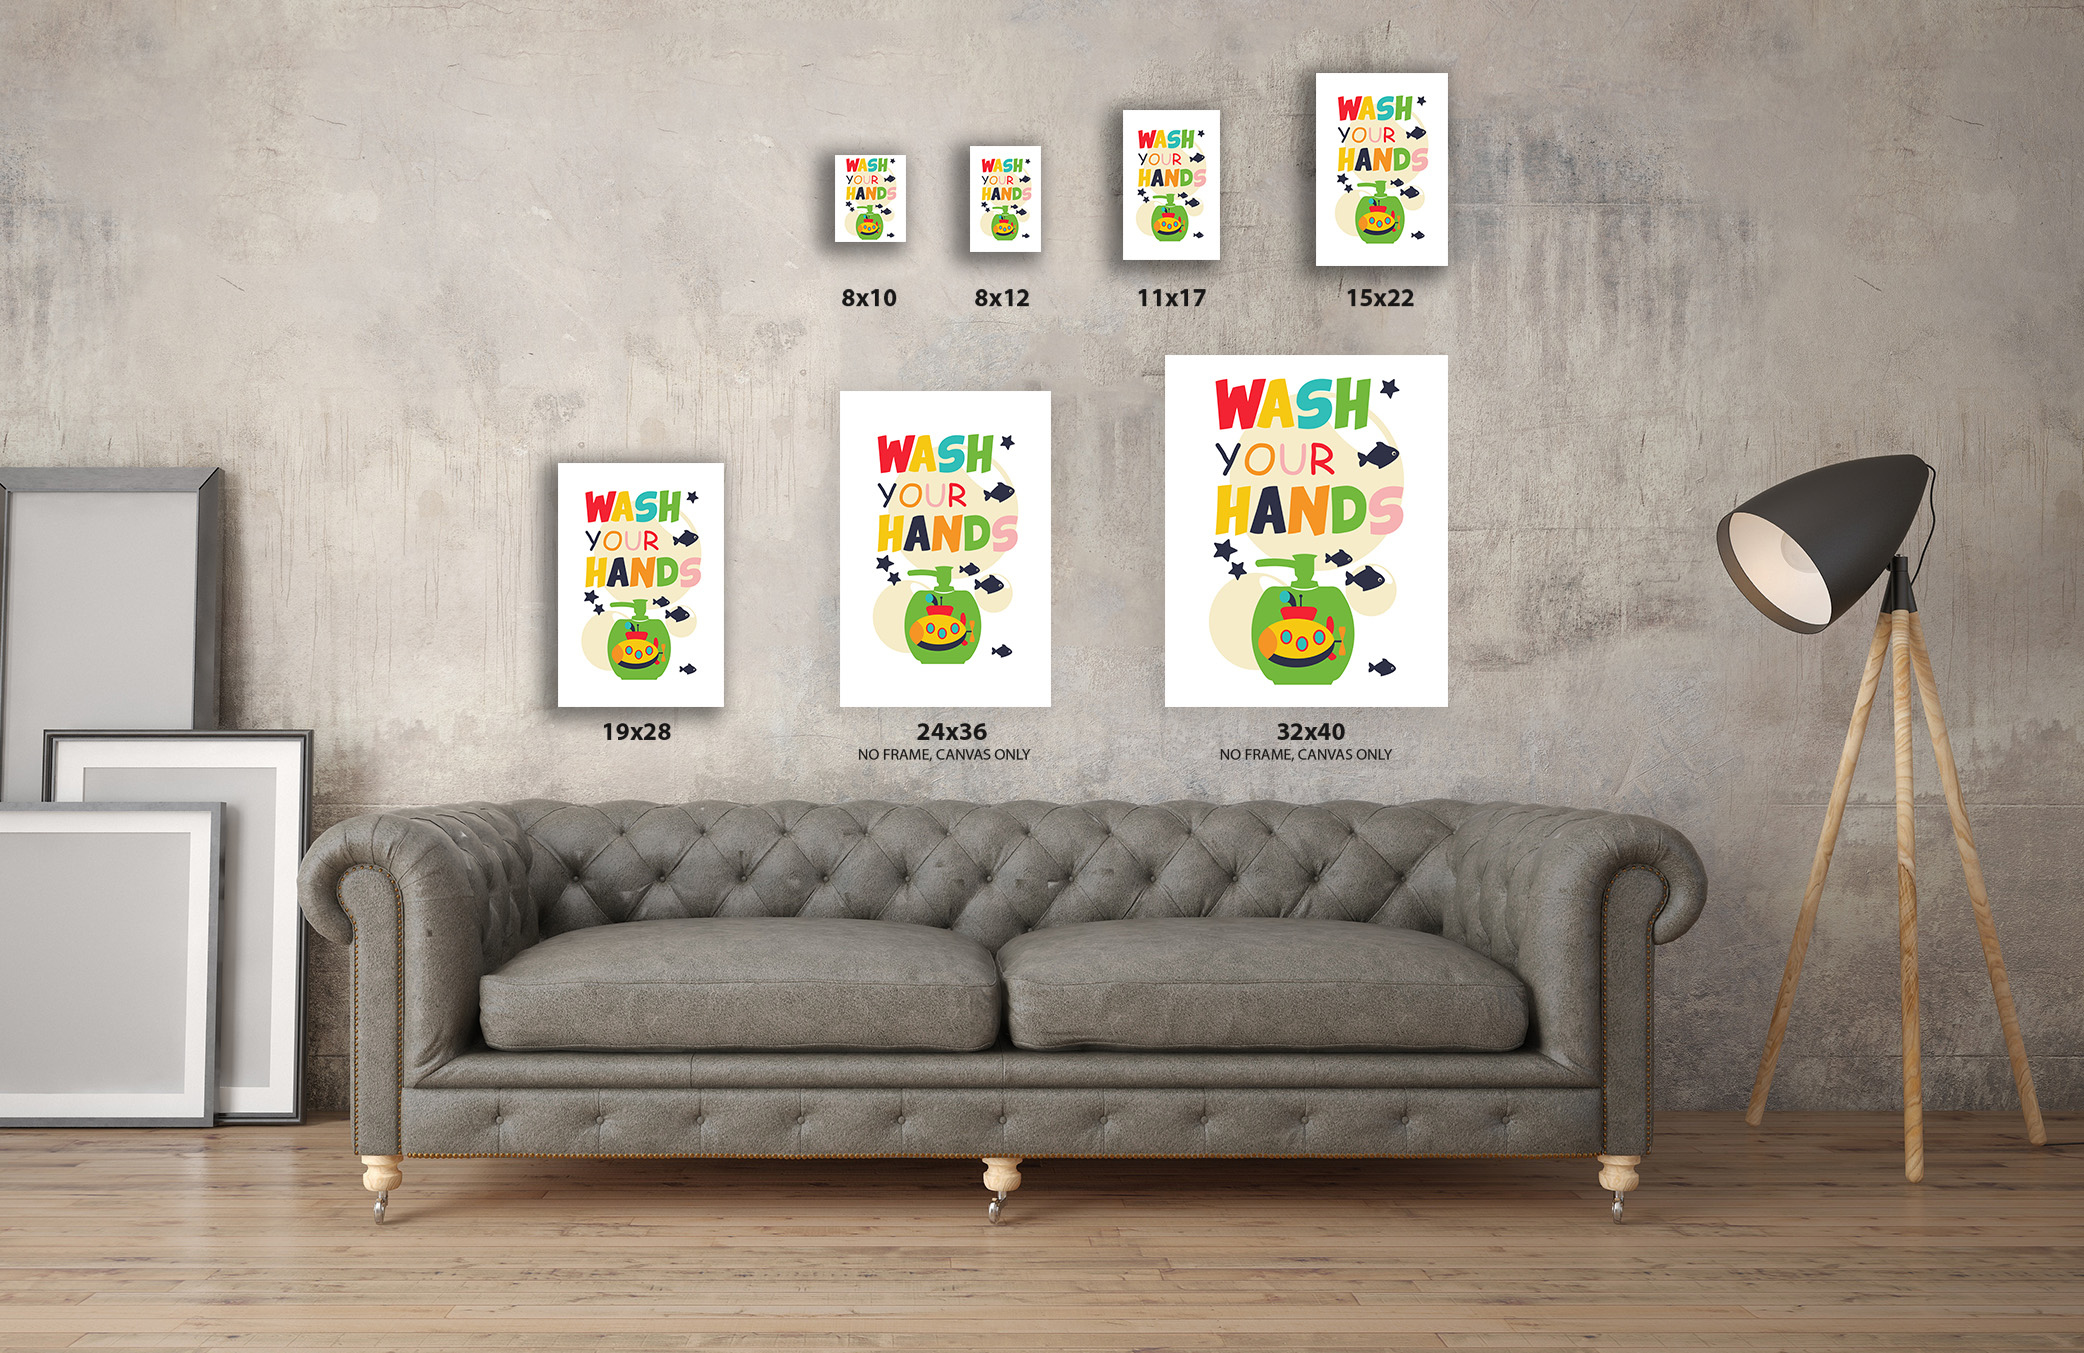 Awkward Styles Wash Your Hands Printed Quotes for Children Wash Your Hands Canvas Wall Decor Colorful Art Decals Wall Art for Home Gifts Kids Bathroom Decor Bathroom Framed Wall Art for Children - image 3 of 7